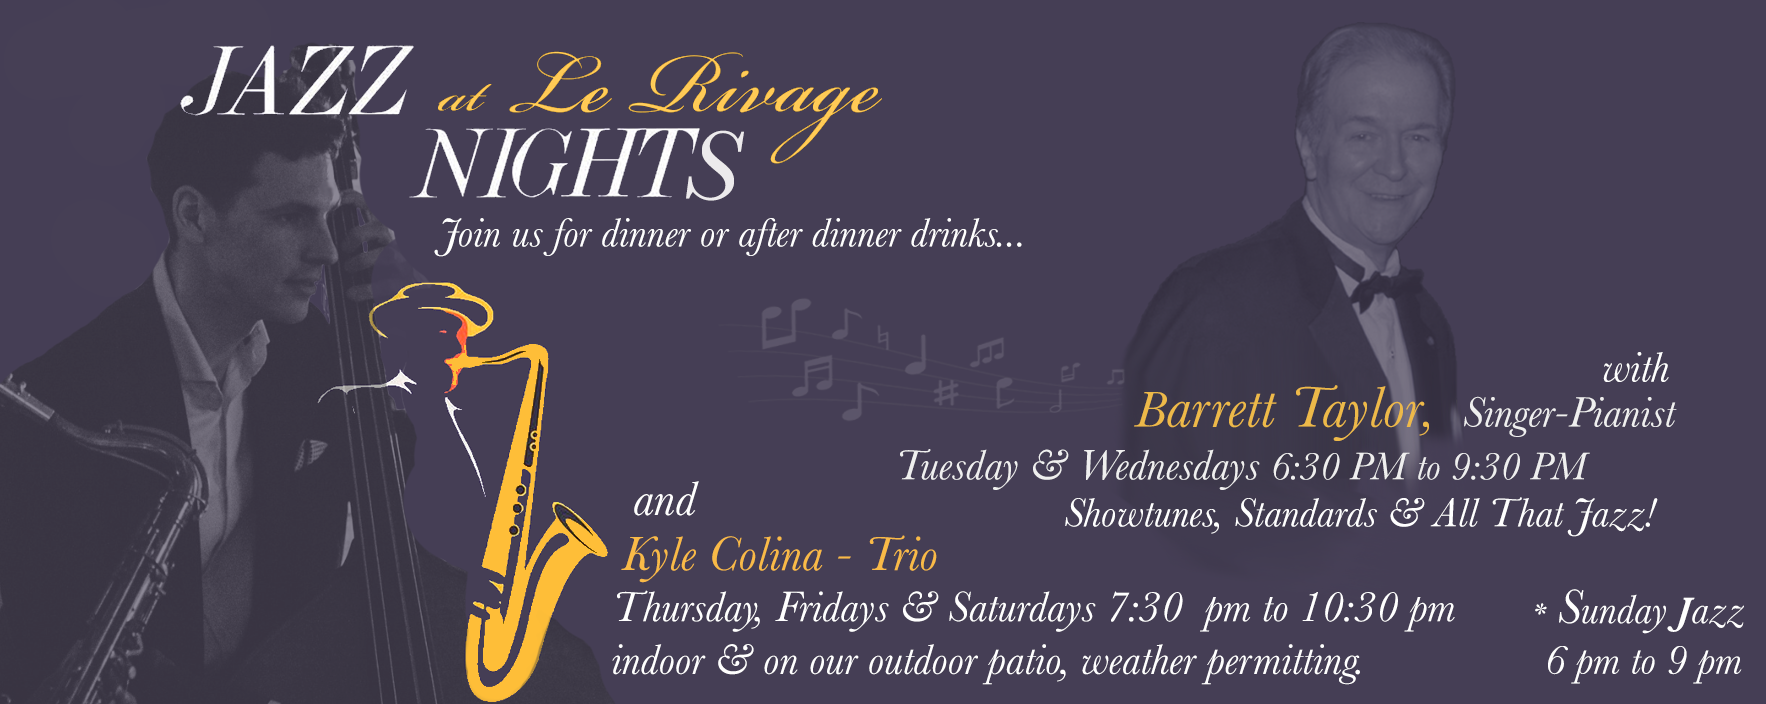 Jazz Nights at Le Rivage with Kyle Colina Quartet and Barrett Taylor. Join us for dinner and after dinner drinks on Thursday, Fridays and Saturdays from 7:30 PM to 10:30 PM and Tuesday and Wednesdays from 6:30 PM to 9:30 PM. Sunday Jazz from 6 PM to 9 PM. Call (212) 765-7374 to make a reservation